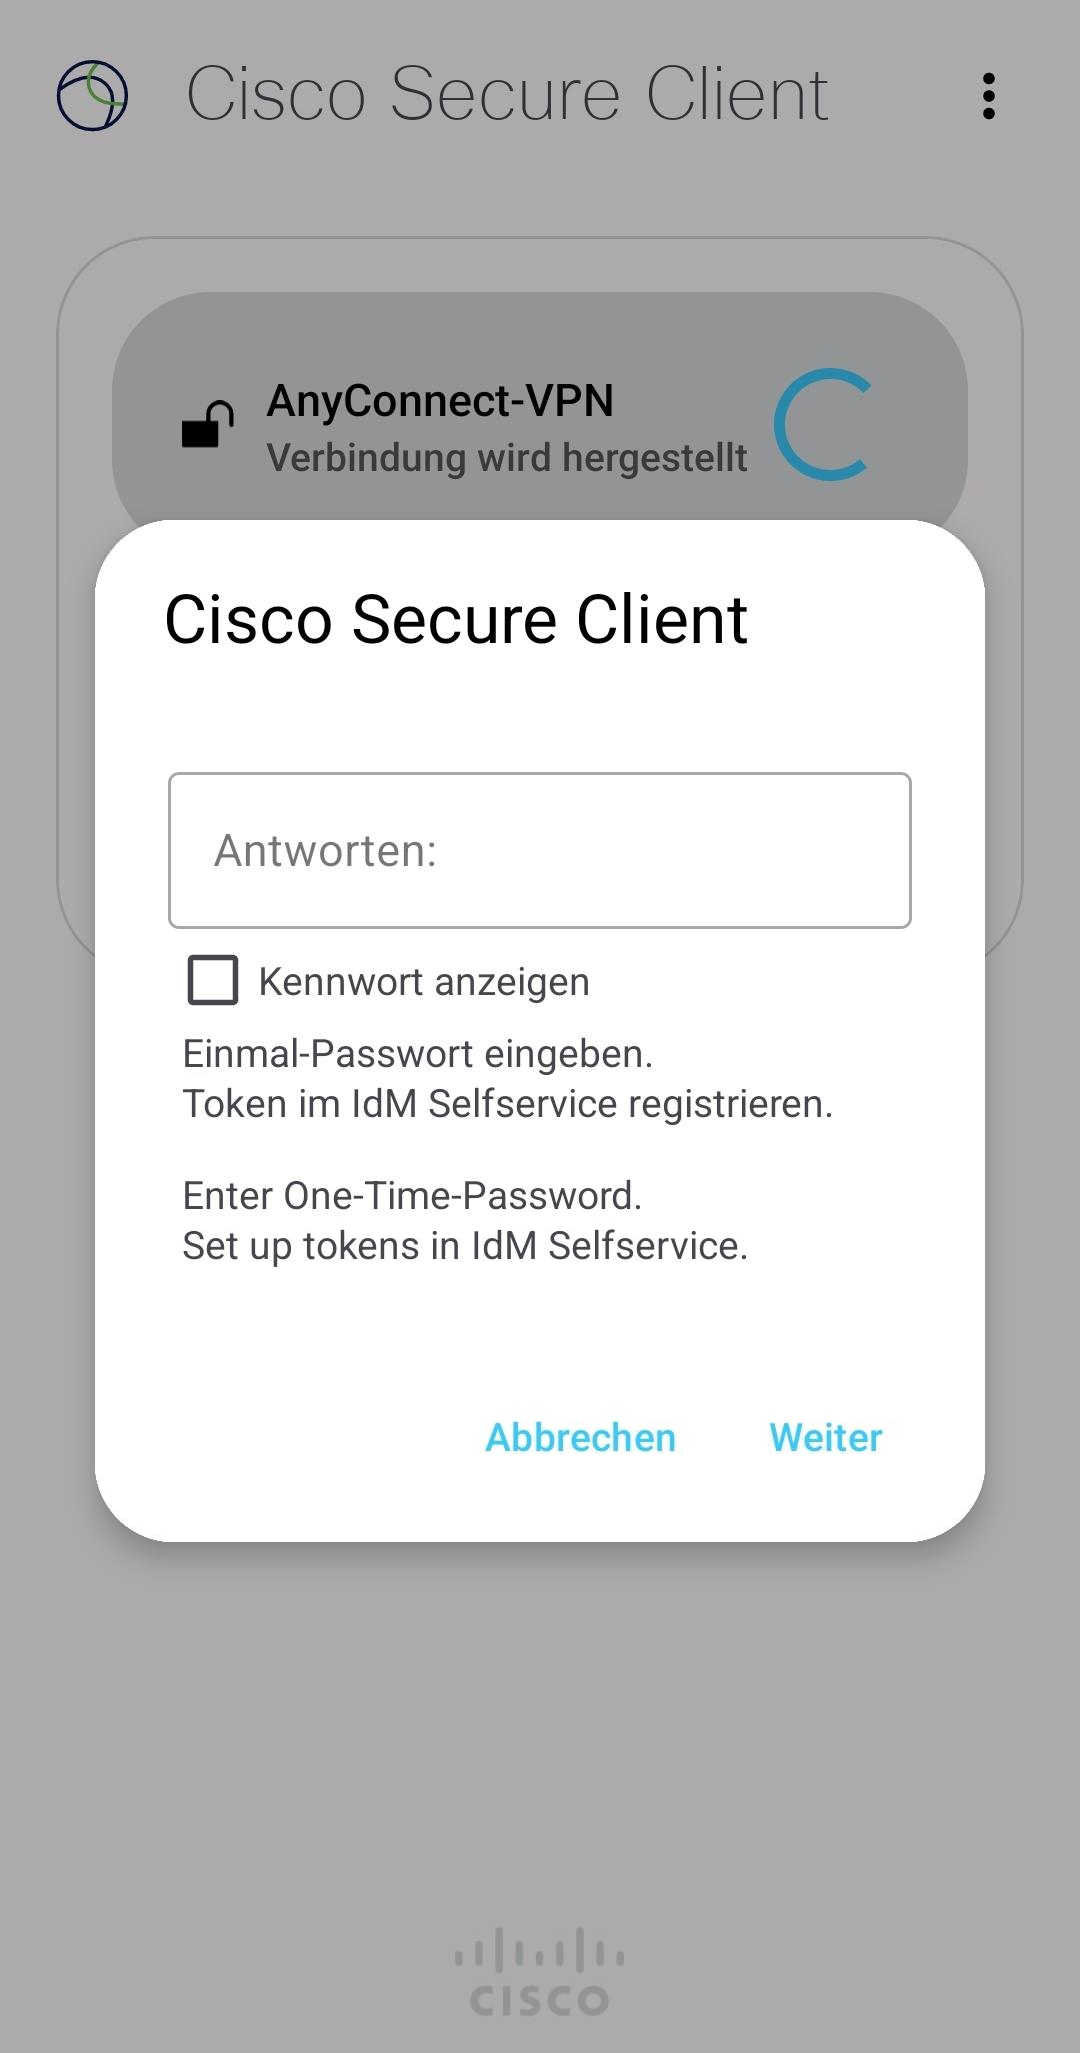 Option for entering a One-Time-Password